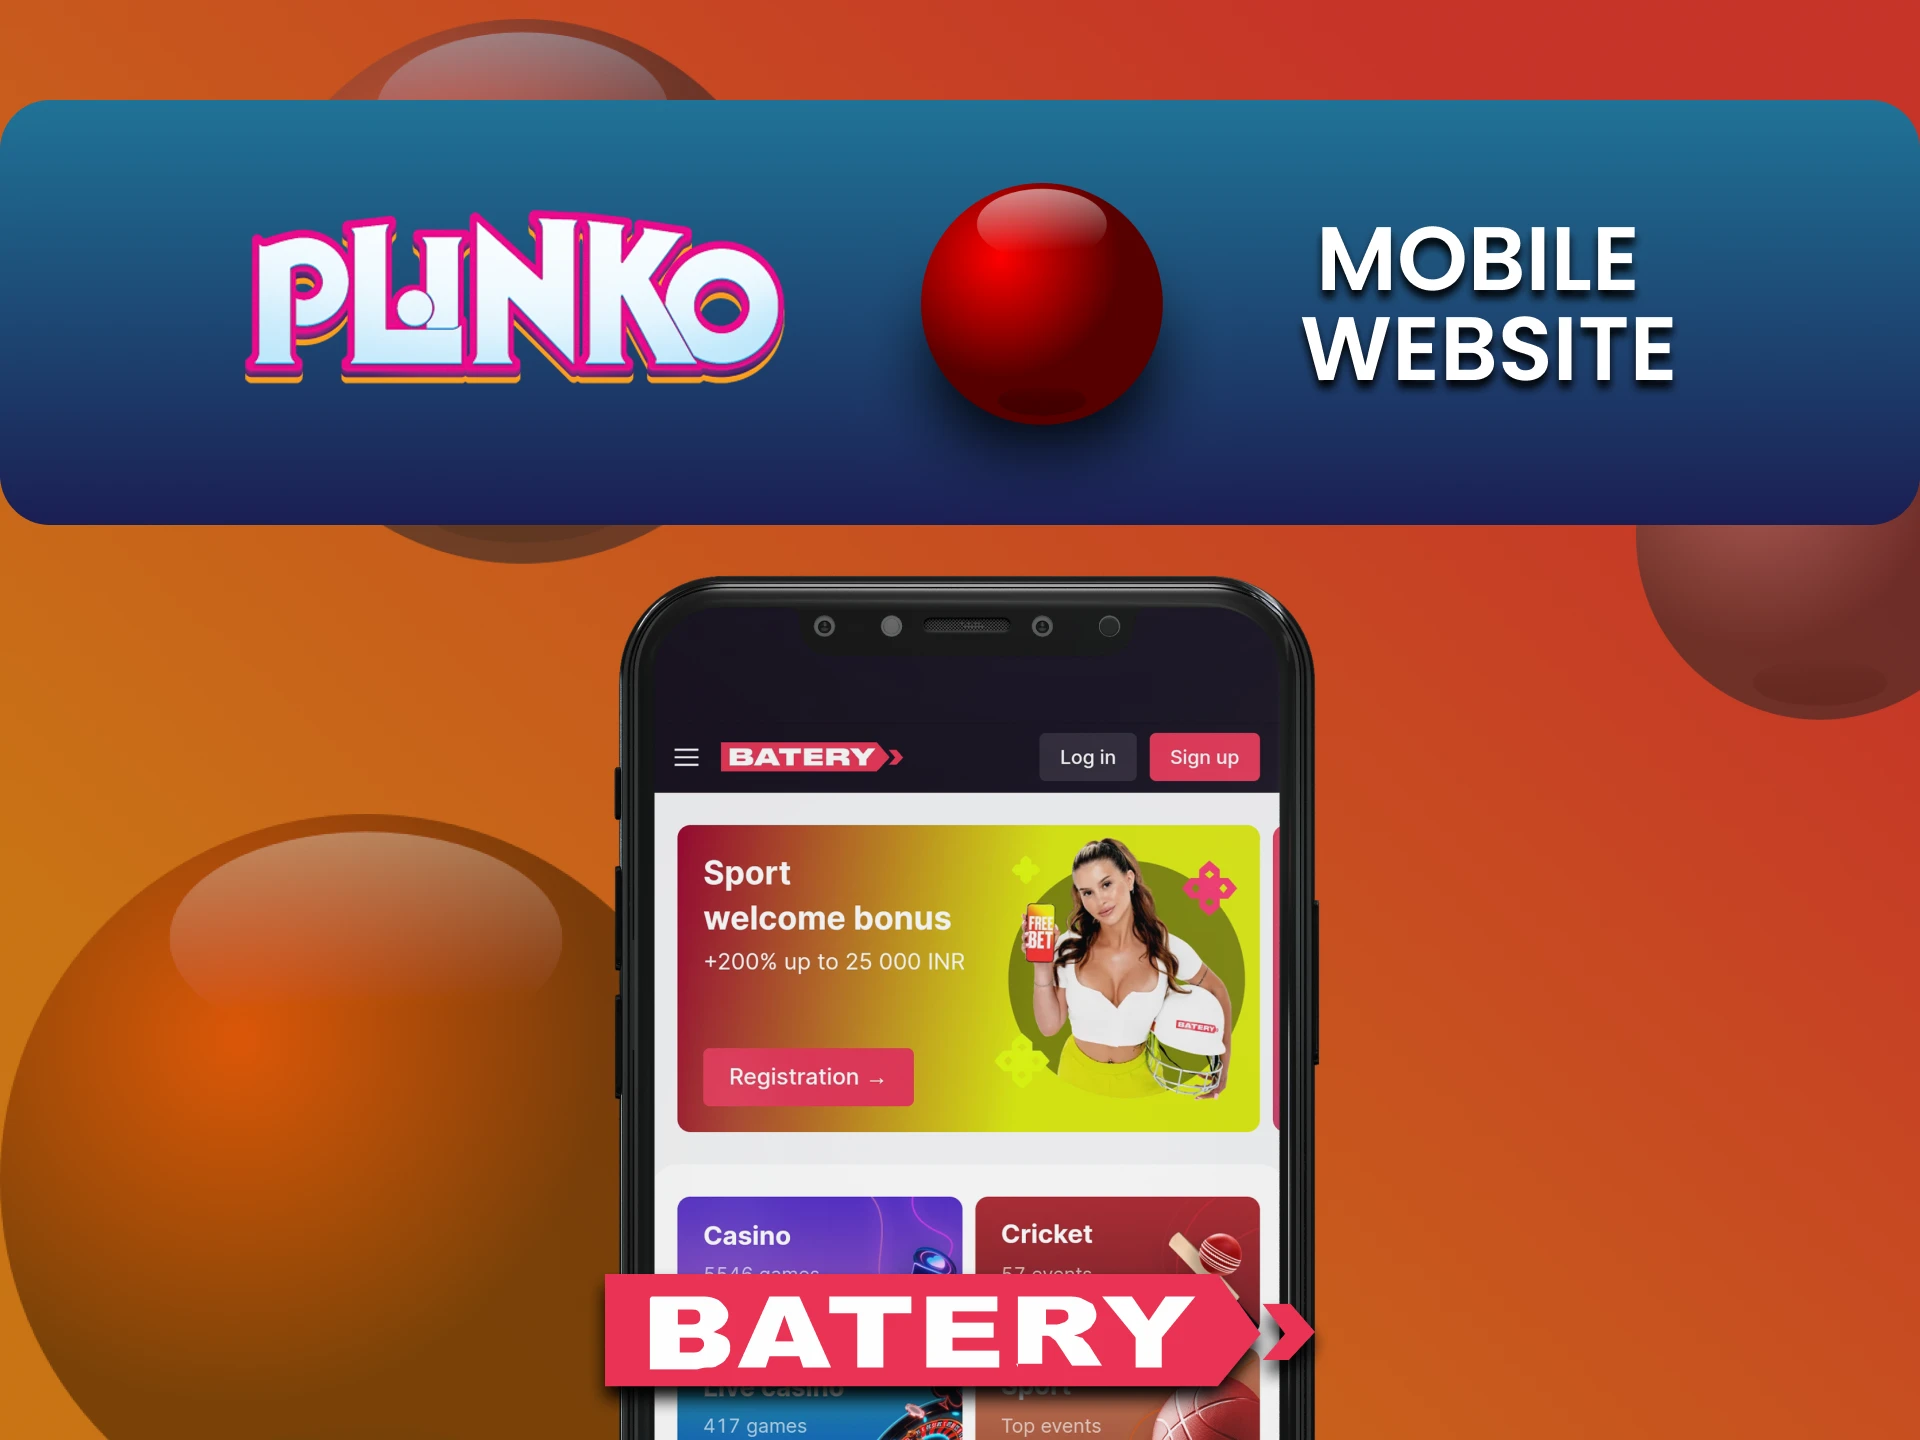 To play Plinko on your phone, visit the Batery website.